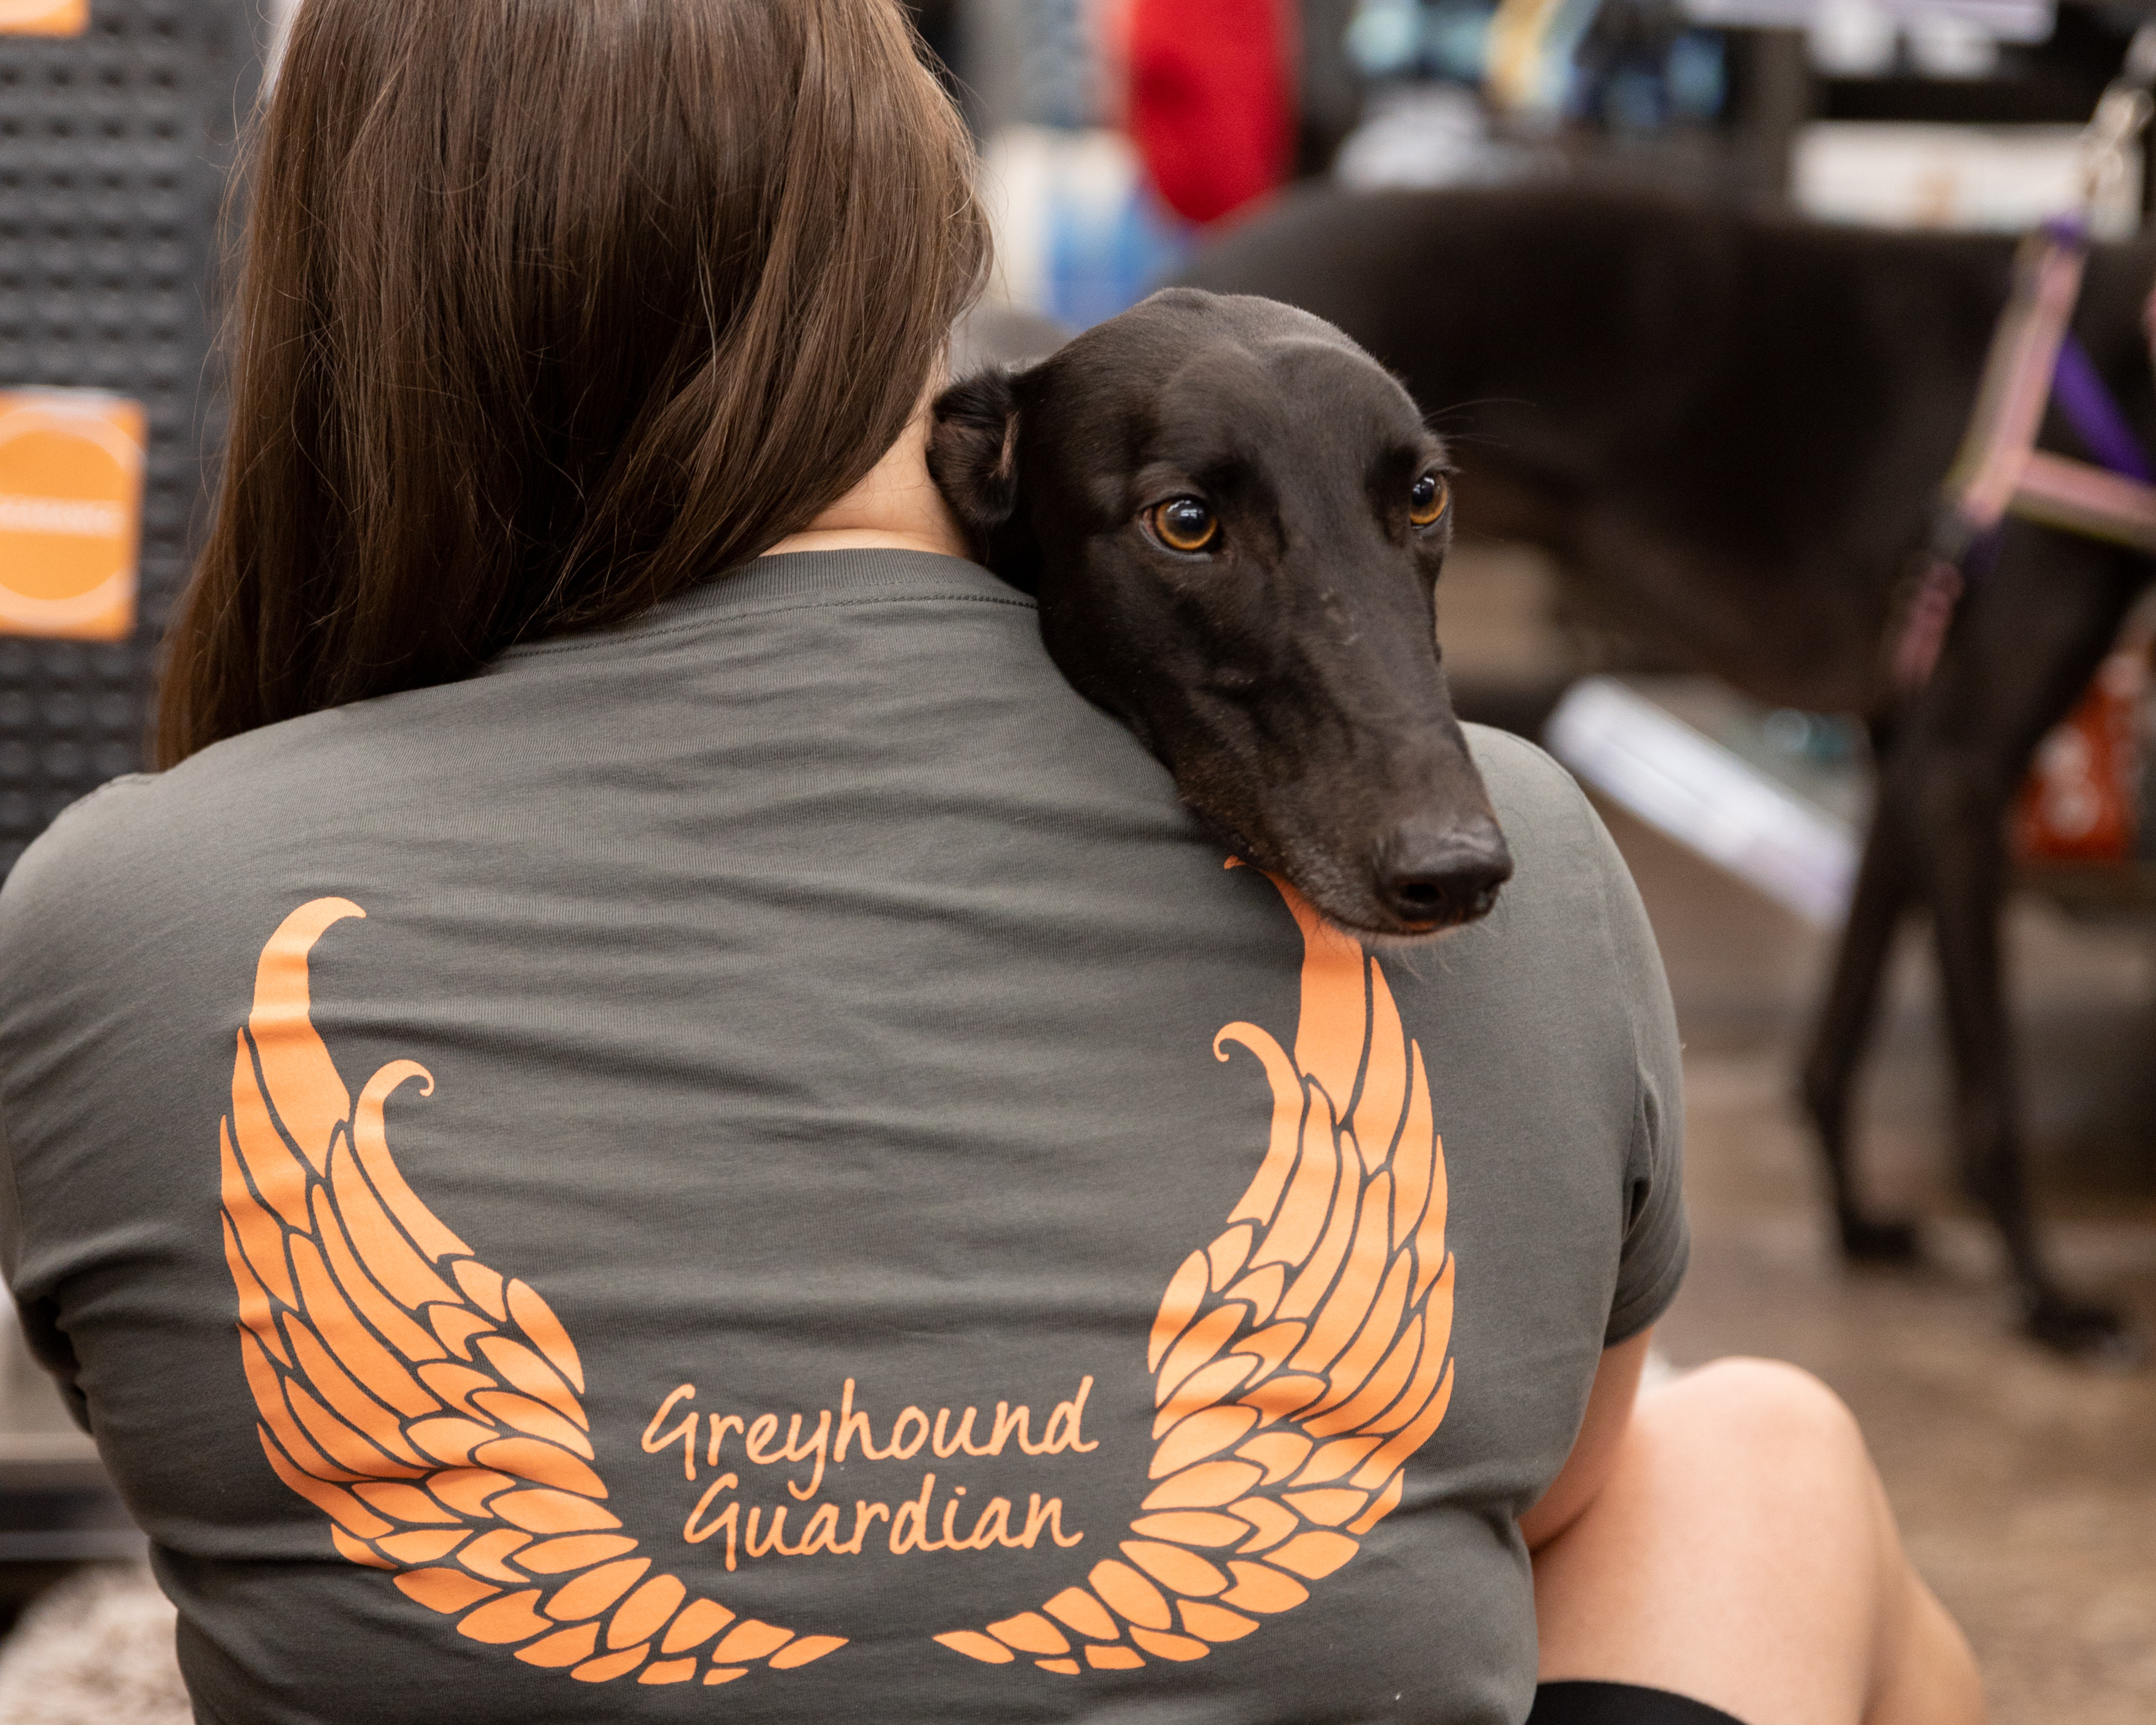 Toby the greyhound's head is visible over a woman's shoulder, who is photographed from behind. She is wearing a shirt with an image of angel wings beside the text 'Greyhound Guardian.'